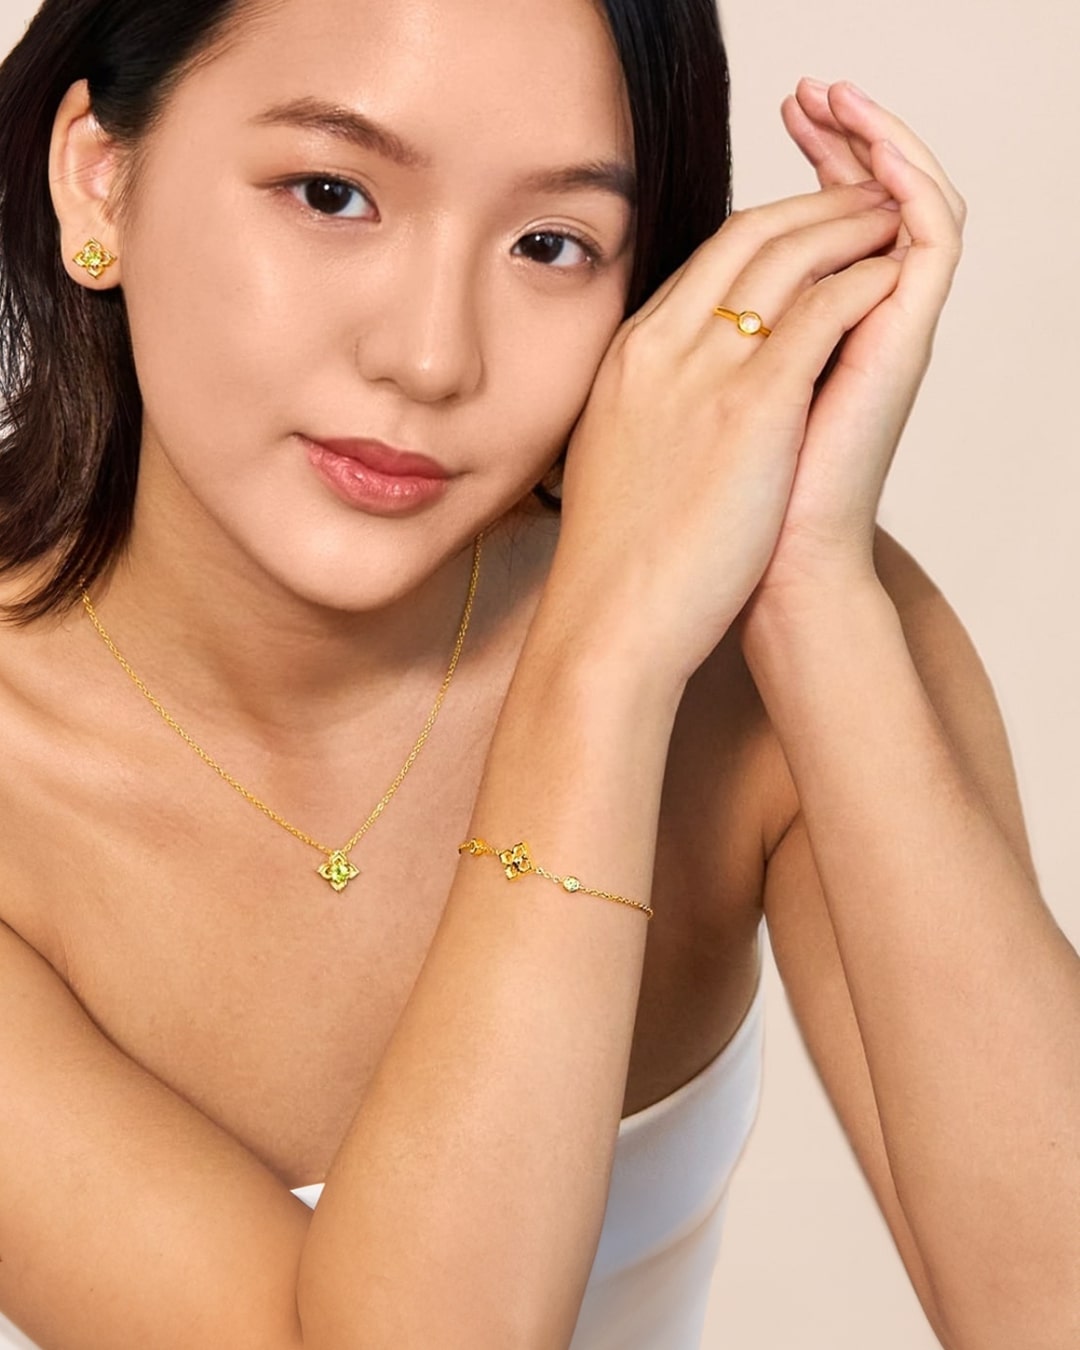 Featuring a model wearing RISIS 18K Gold Timeless Peranakan Jewellery Collection